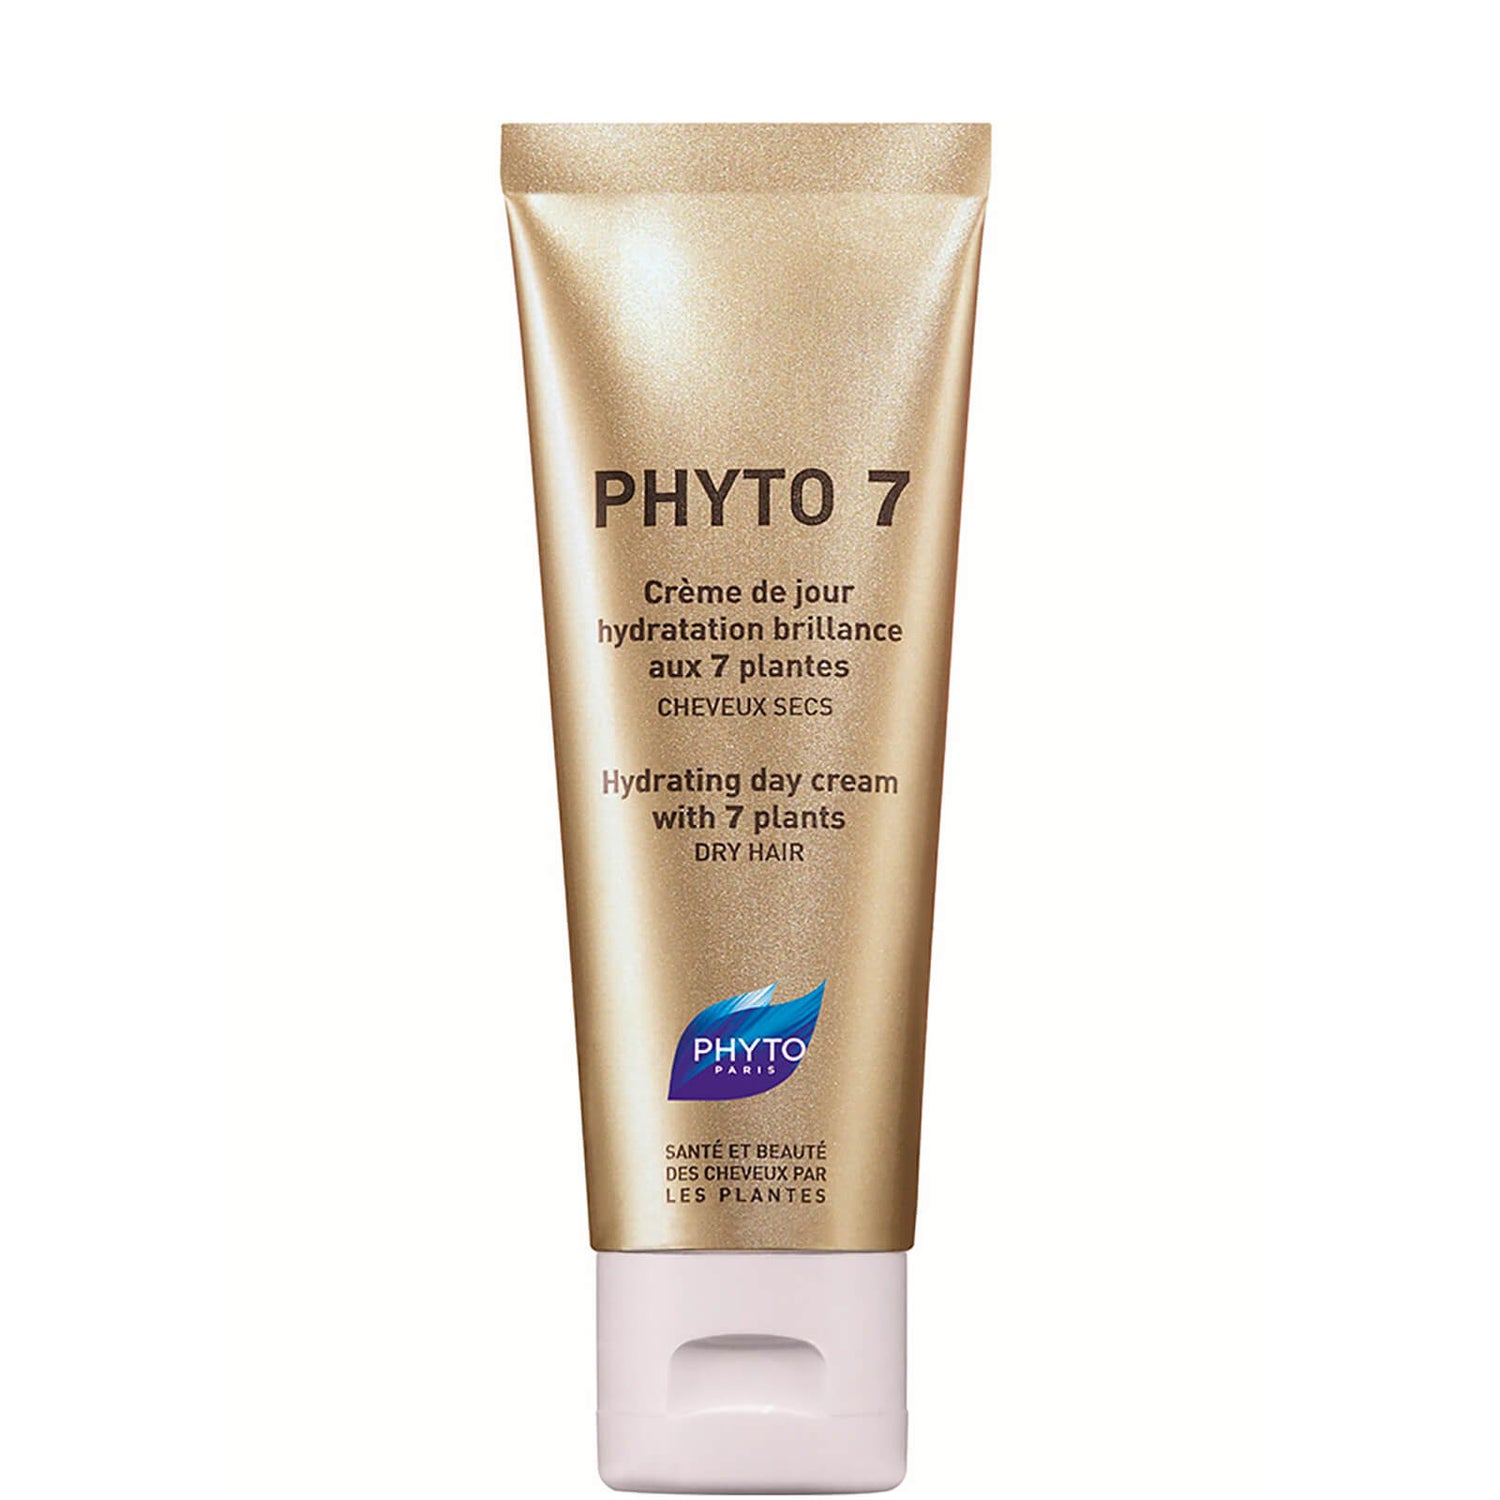 Phyto PHYTO 7 Hydrating Day Cream with 7 Plants